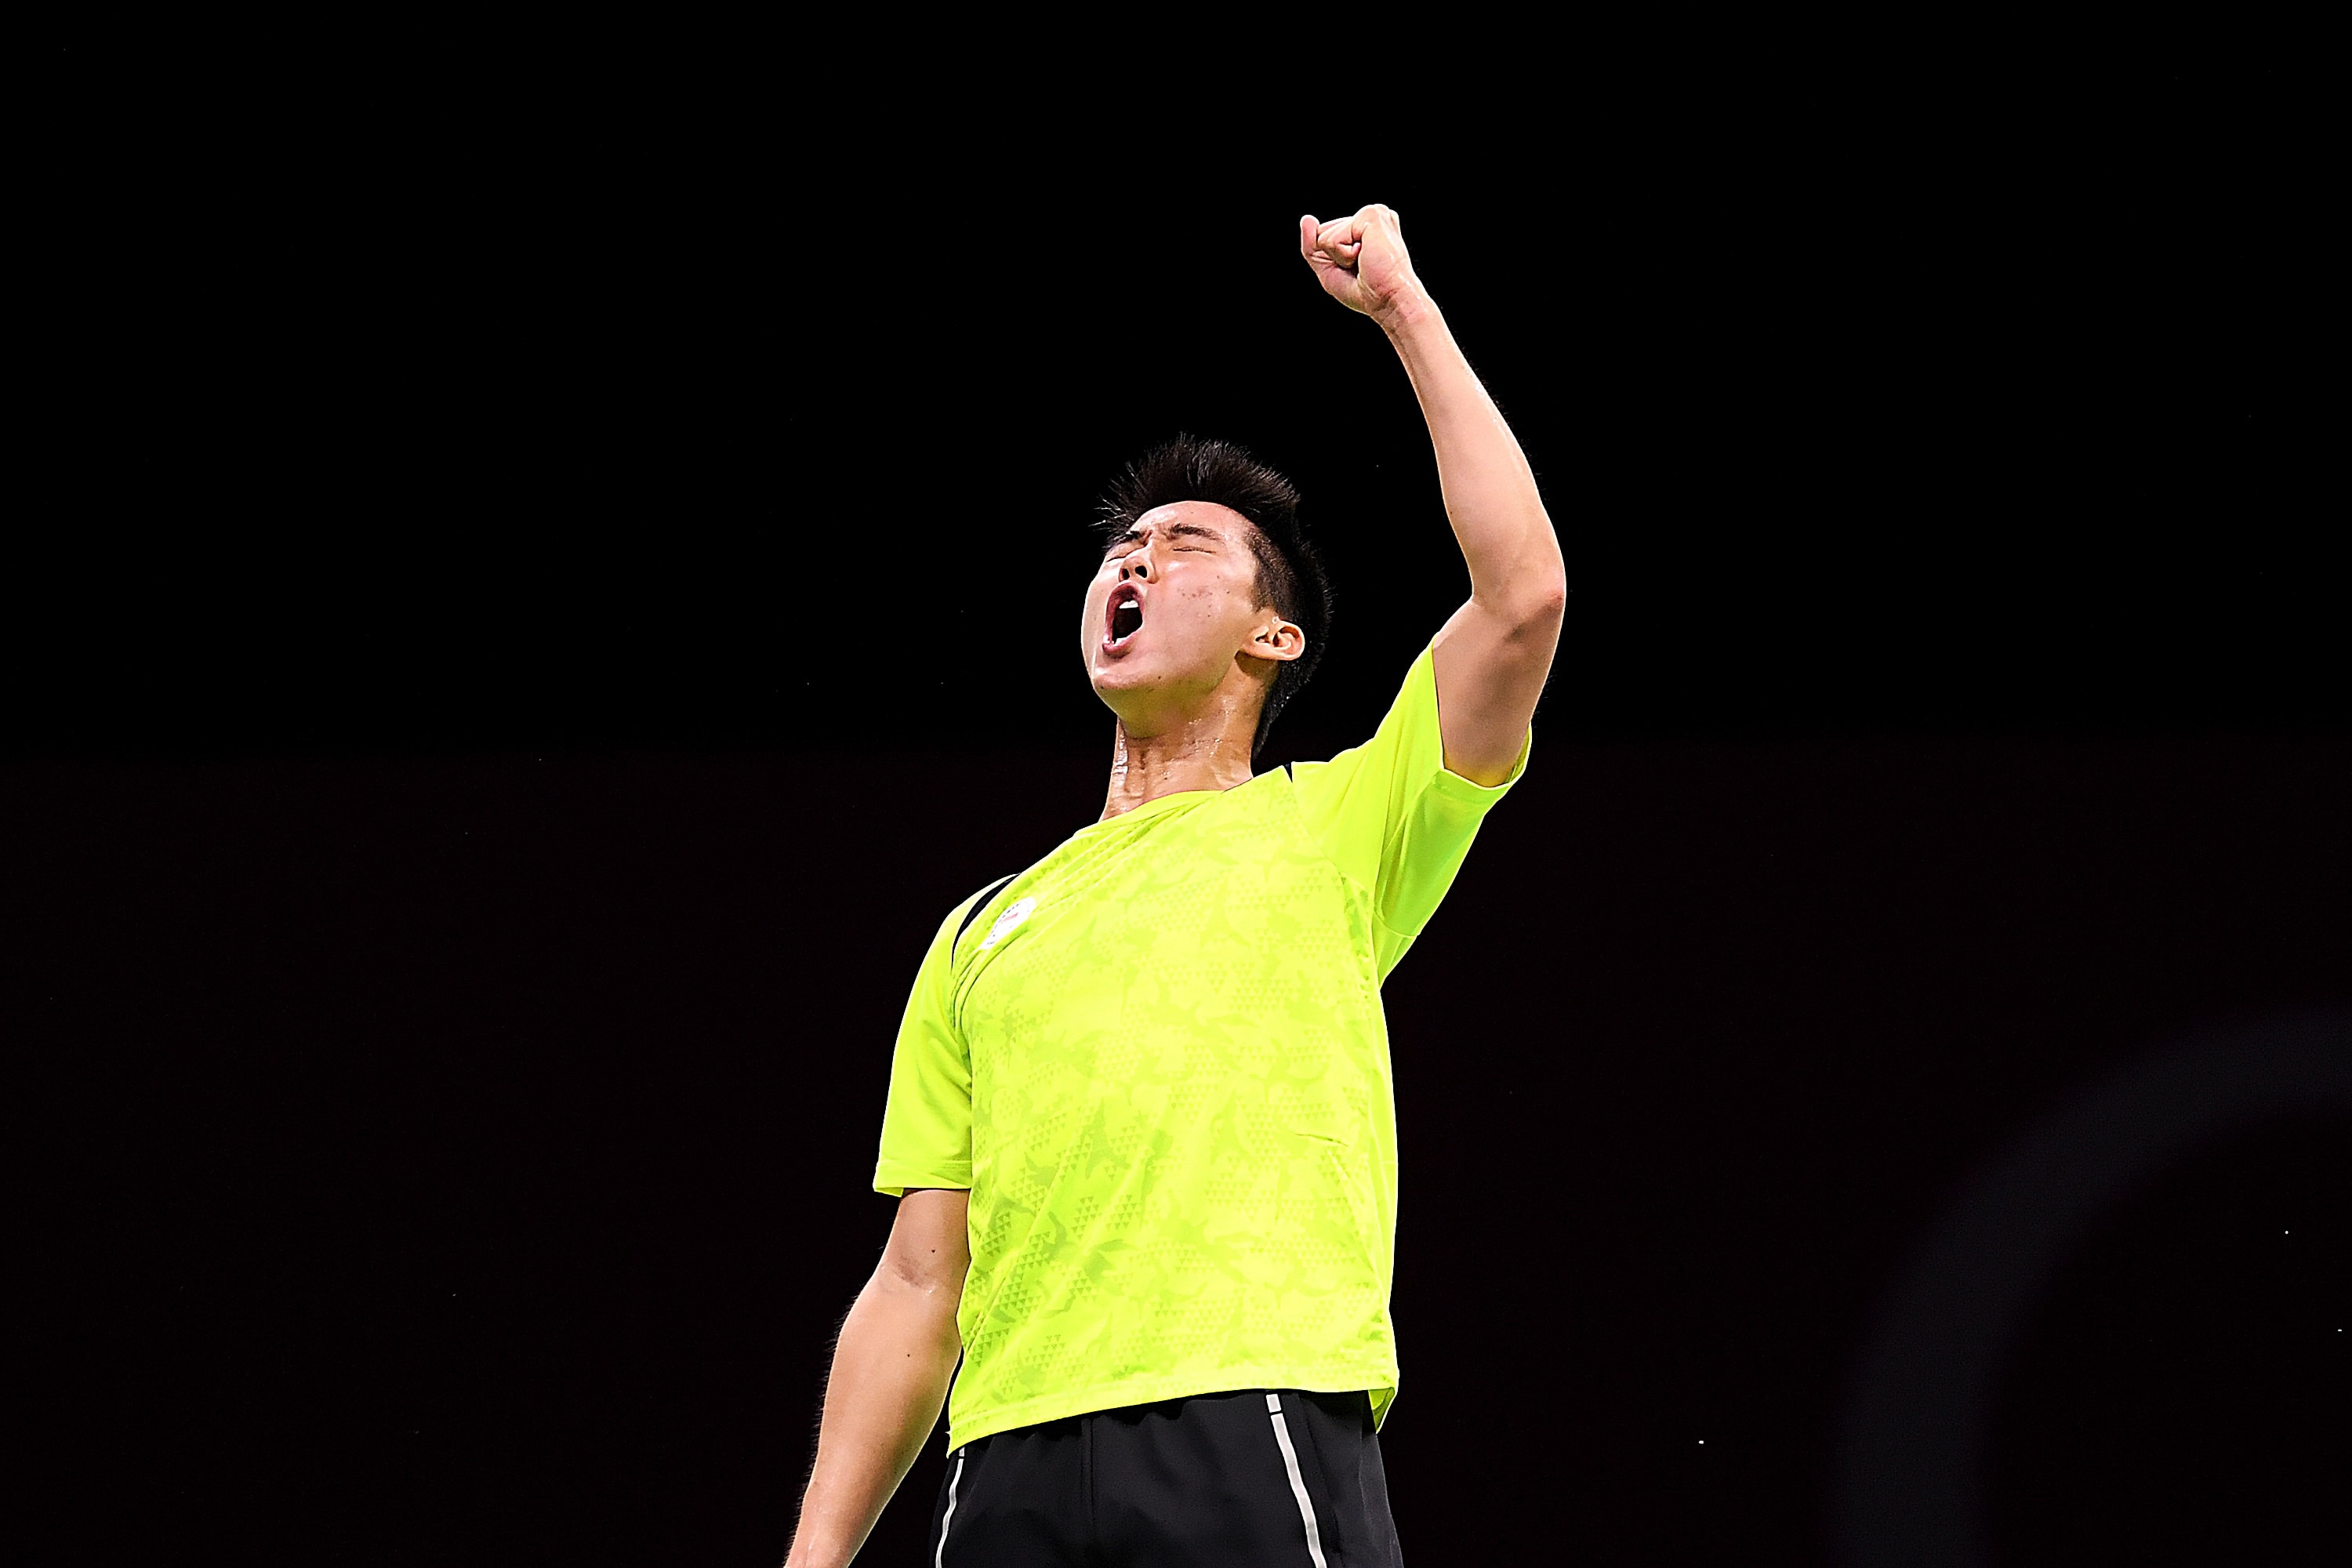 Loh Kean Yew advances to round of 16 at 2022 Commonwealth Games